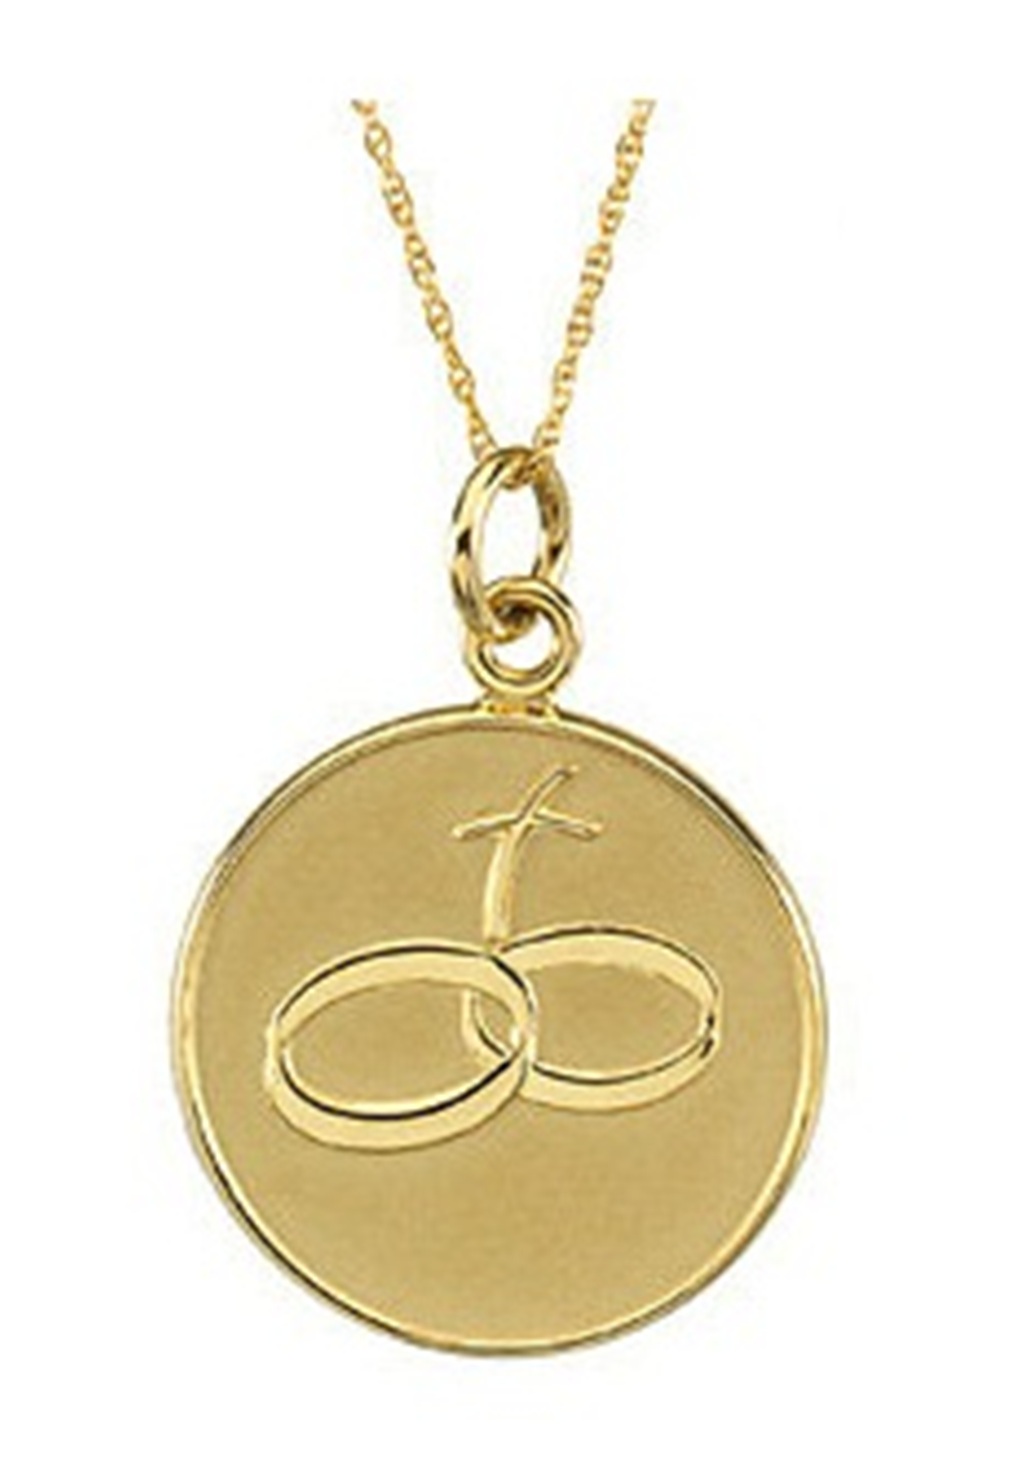 Loss of a Spouse Pendant Neclace, 14k Yellow Gold